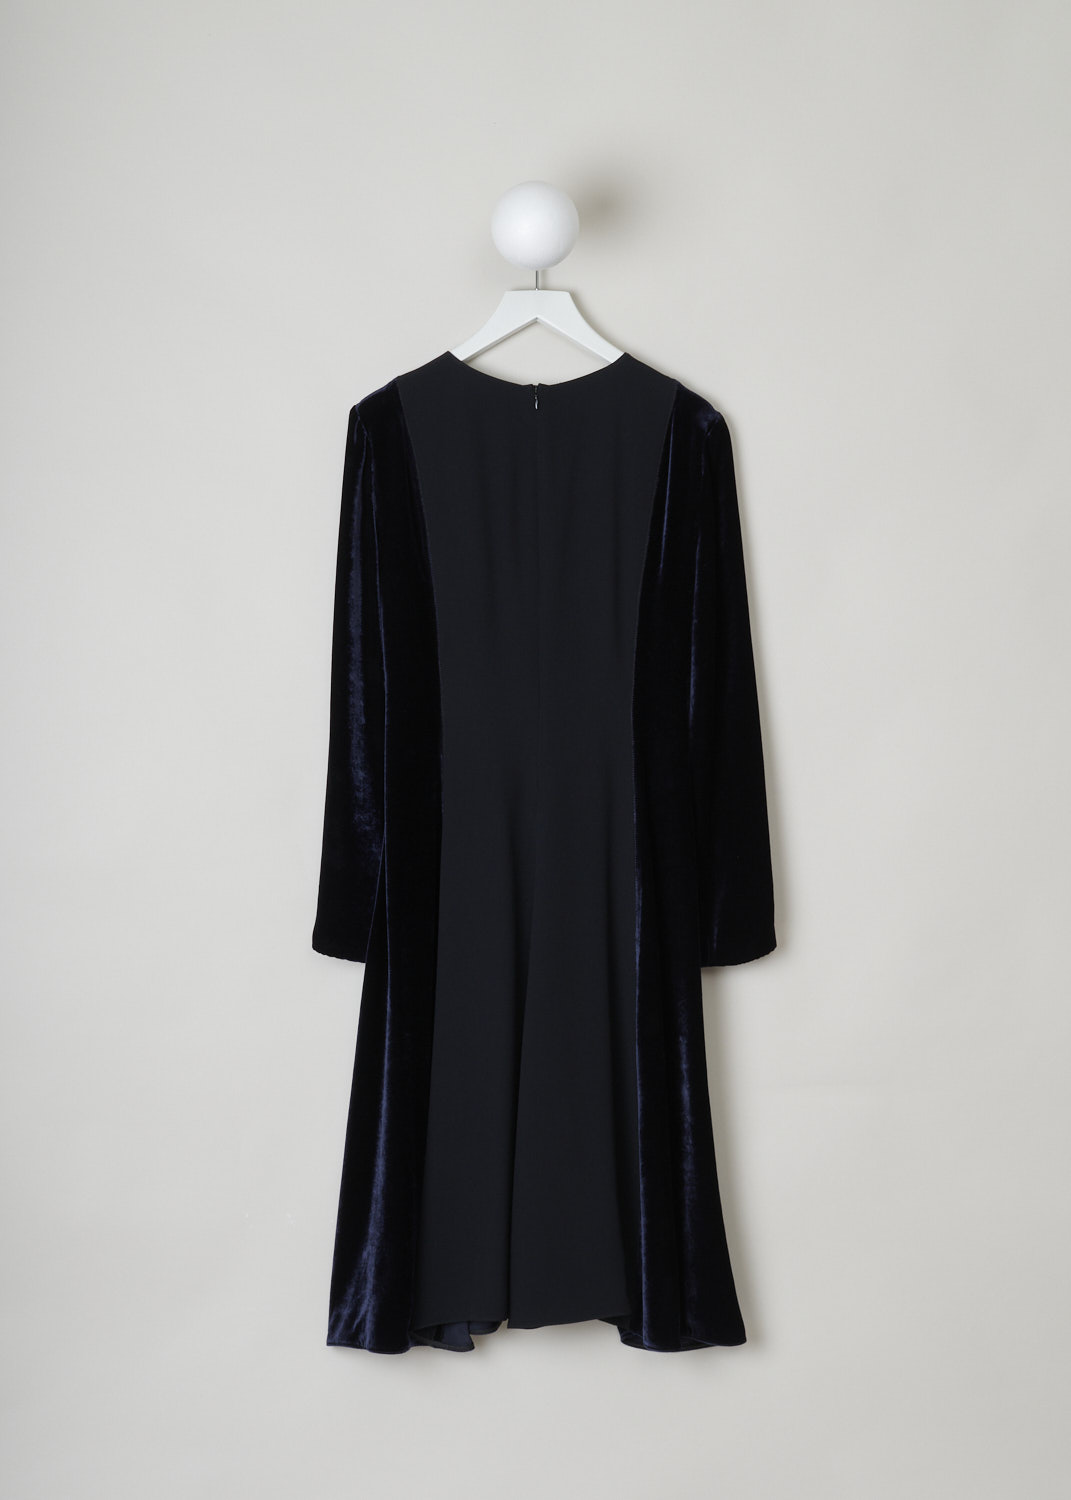 Marni, Max length black velvet tent dress, ABMA0602QU_TA107_00N99, black, back, Lovely black tent dress consisting of two materials, a black velvety material and a smooth stretchy material in the middle. Comes with a round neckline and long sleeves. The concealed zipper can be found on the back.  